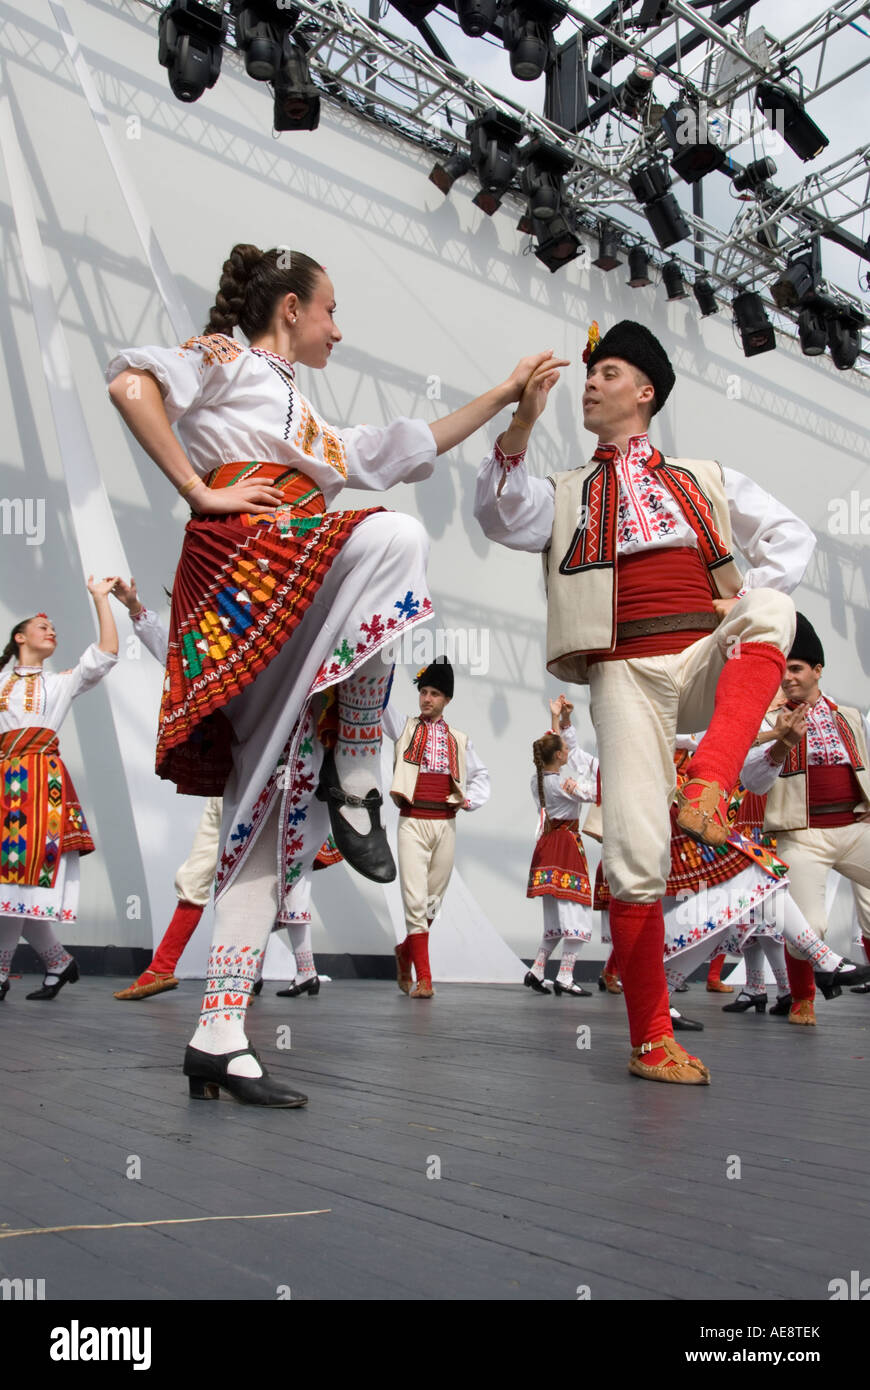 Image of Folk Dancers From Bulgaria at the Confolens Festival Stock Photo -  Alamy